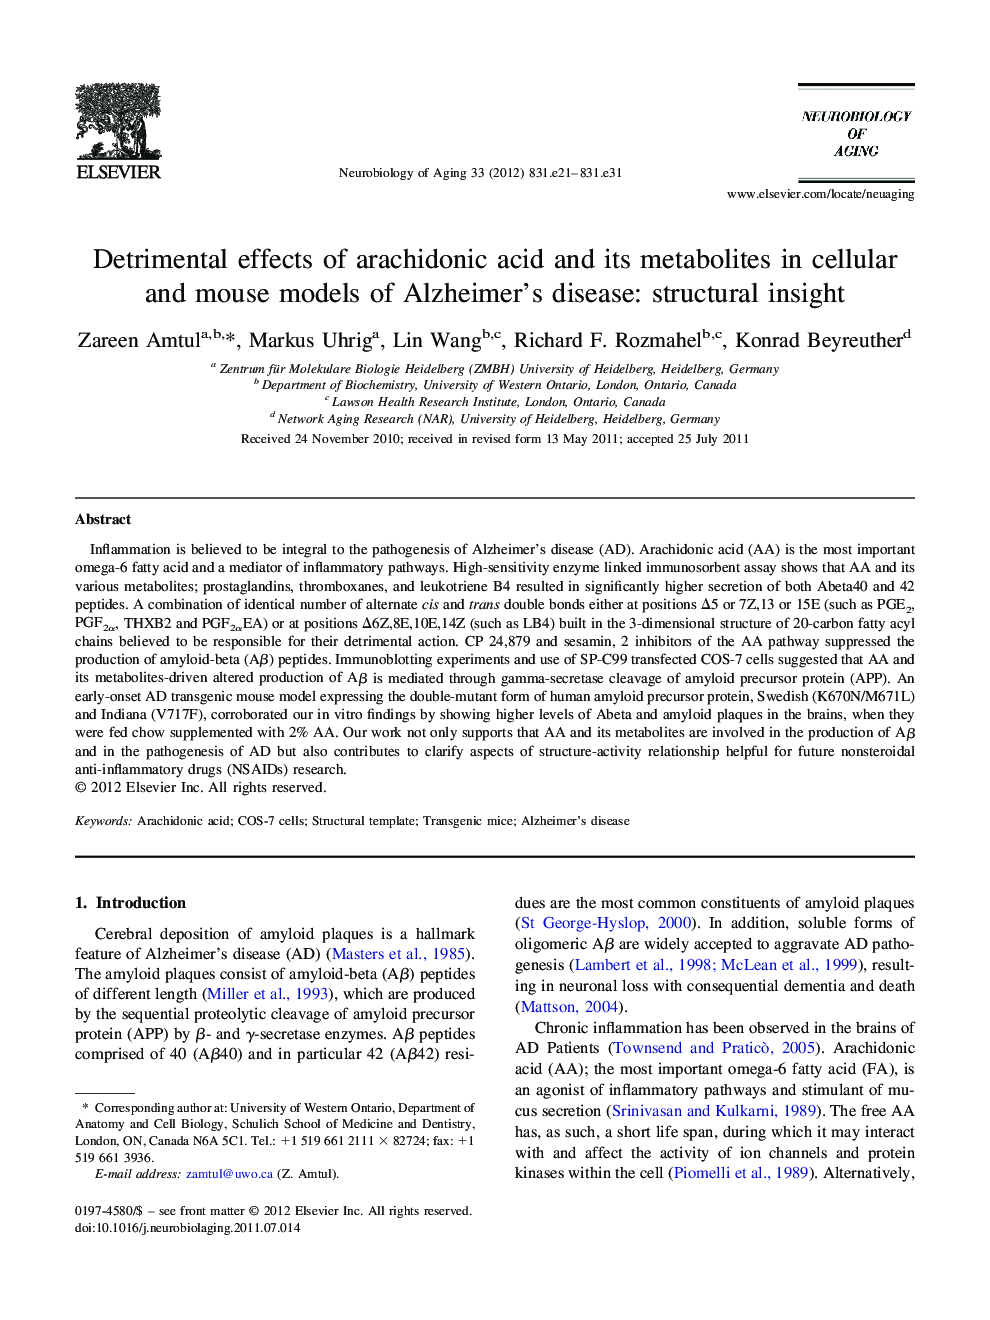 Detrimental effects of arachidonic acid and its metabolites in cellular and mouse models of Alzheimer's disease: structural insight